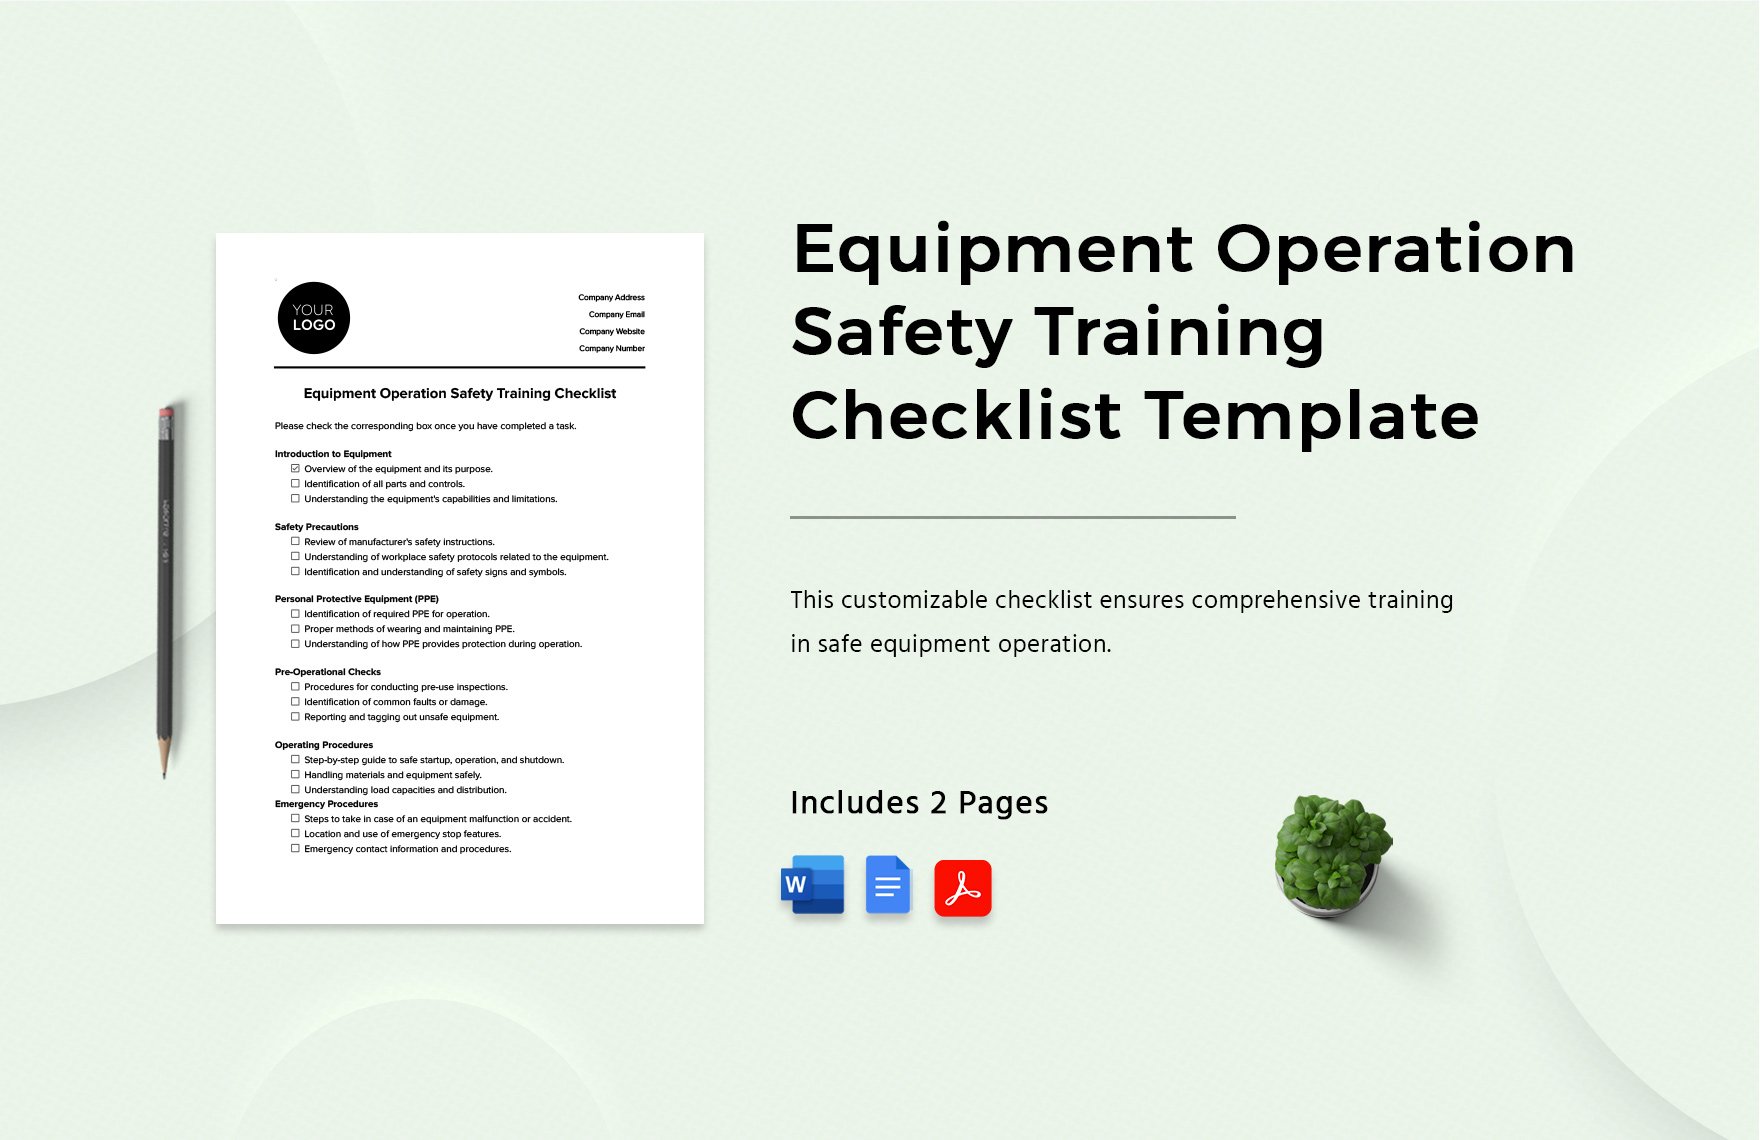 Equipment Operation Safety Training Checklist Template in Word, Google Docs, PDF